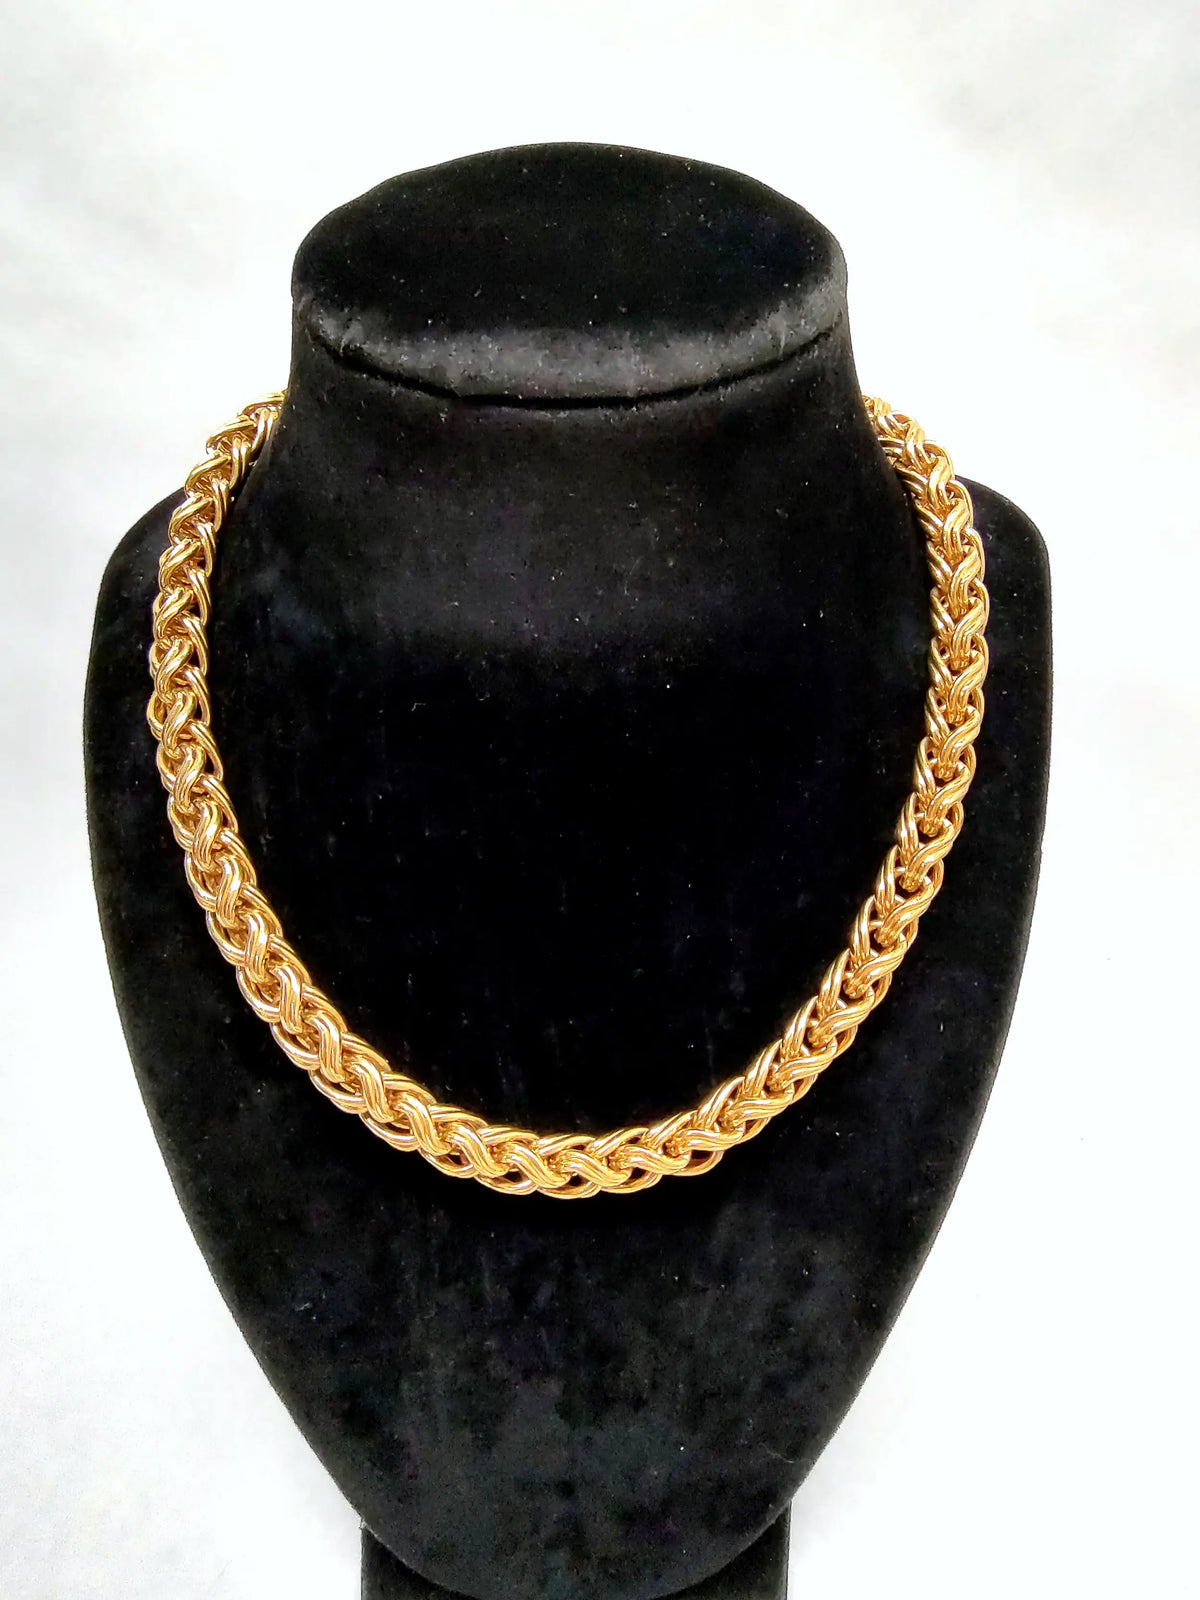 Monet Gold Tone Wheat Chain Link Necklace - Hers and His Treasures